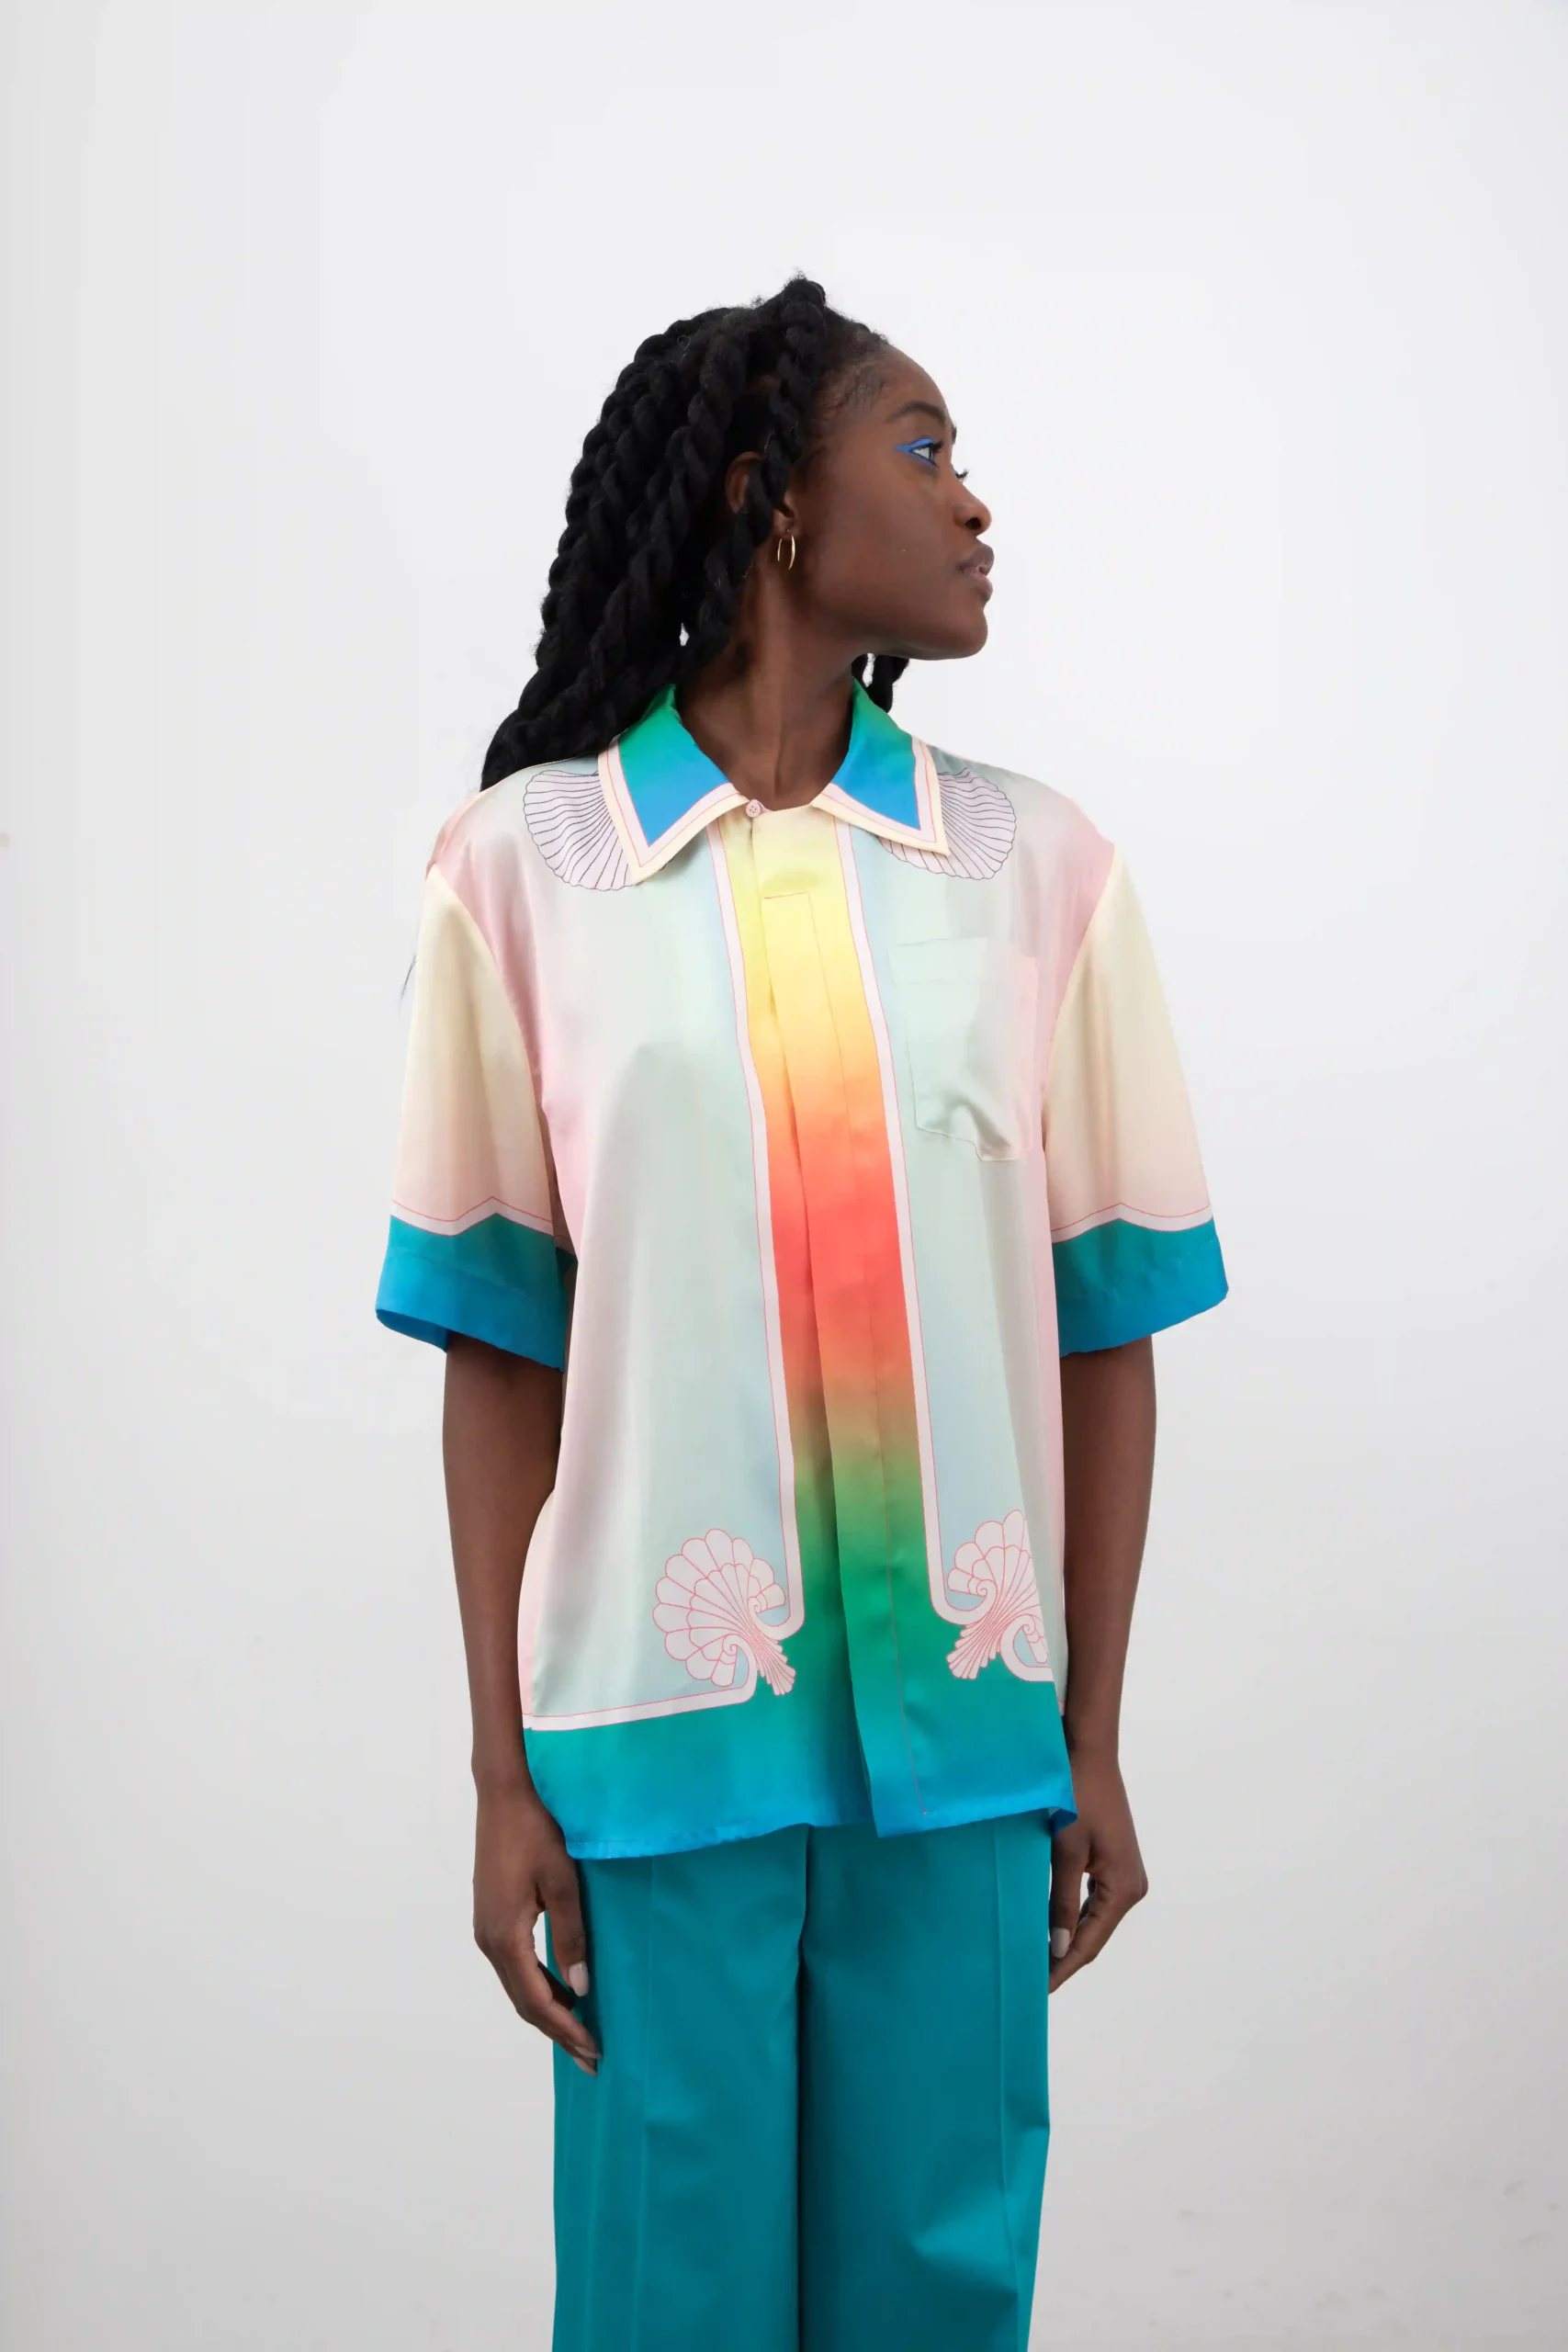 Casablanca shirt, 100% silk, multicolor print. Front with shades and shells, back with paradise beach design. Concealed button placket. Made in Italy.